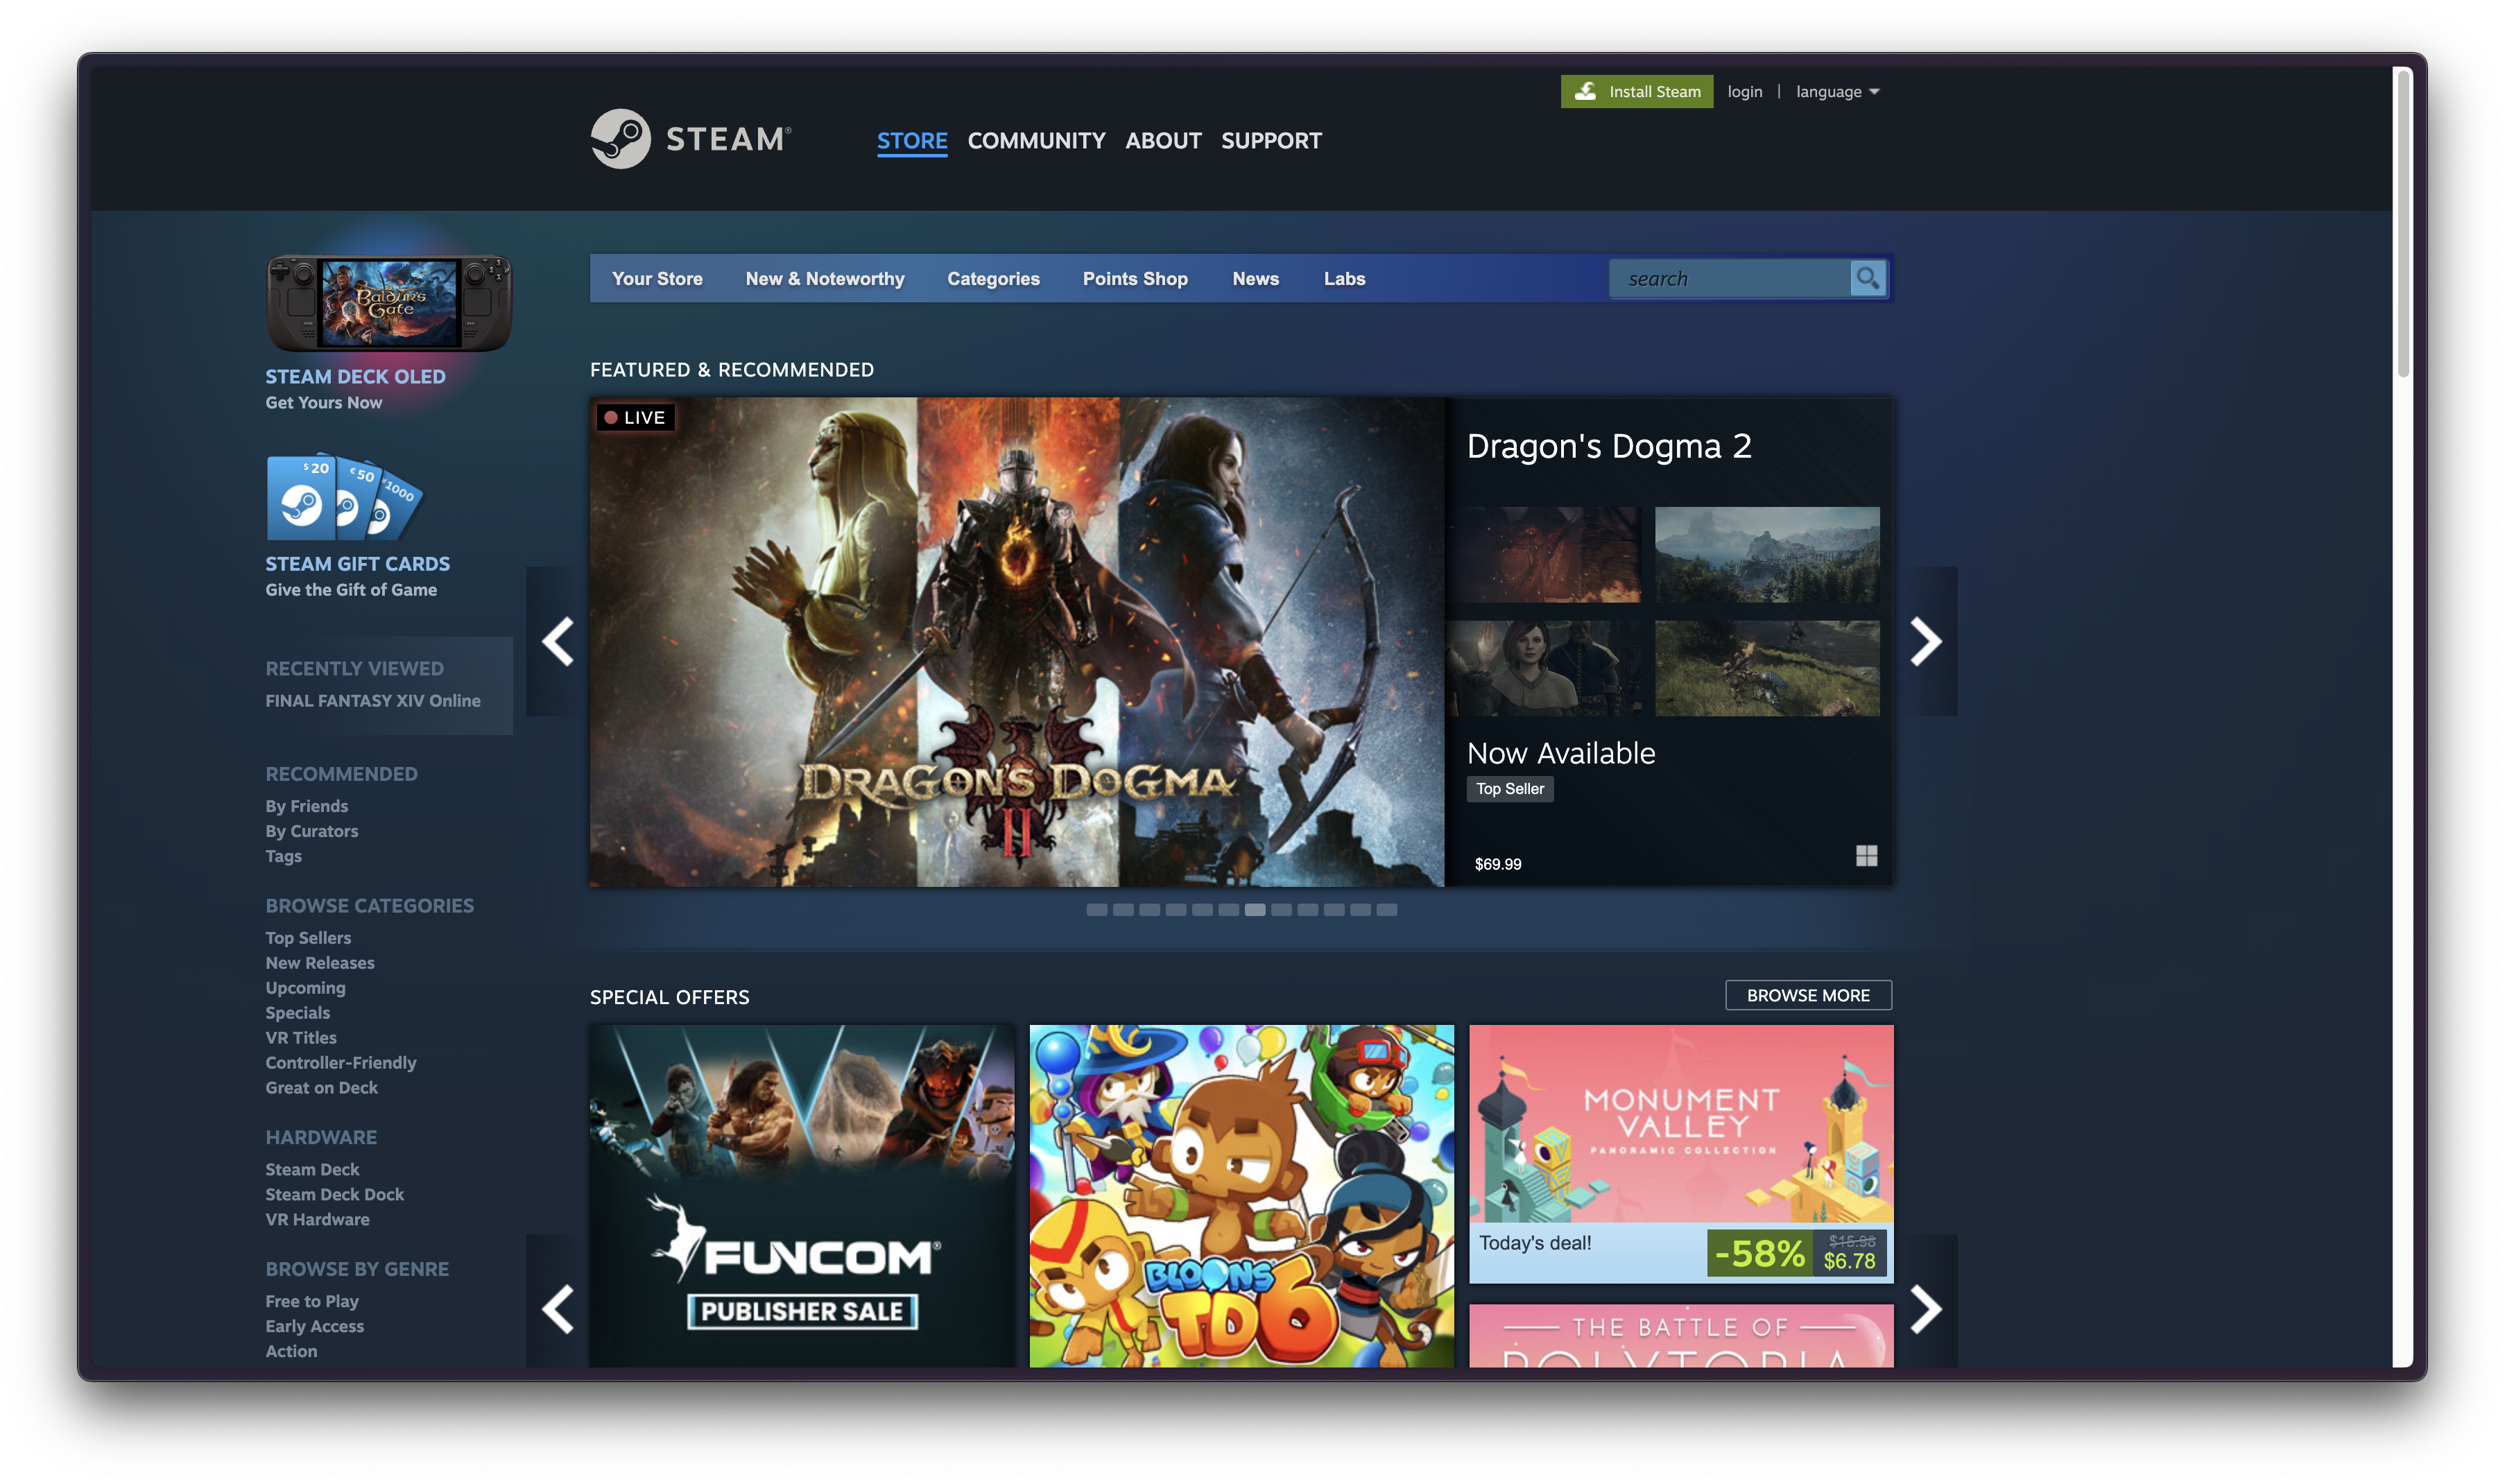 Steam home page